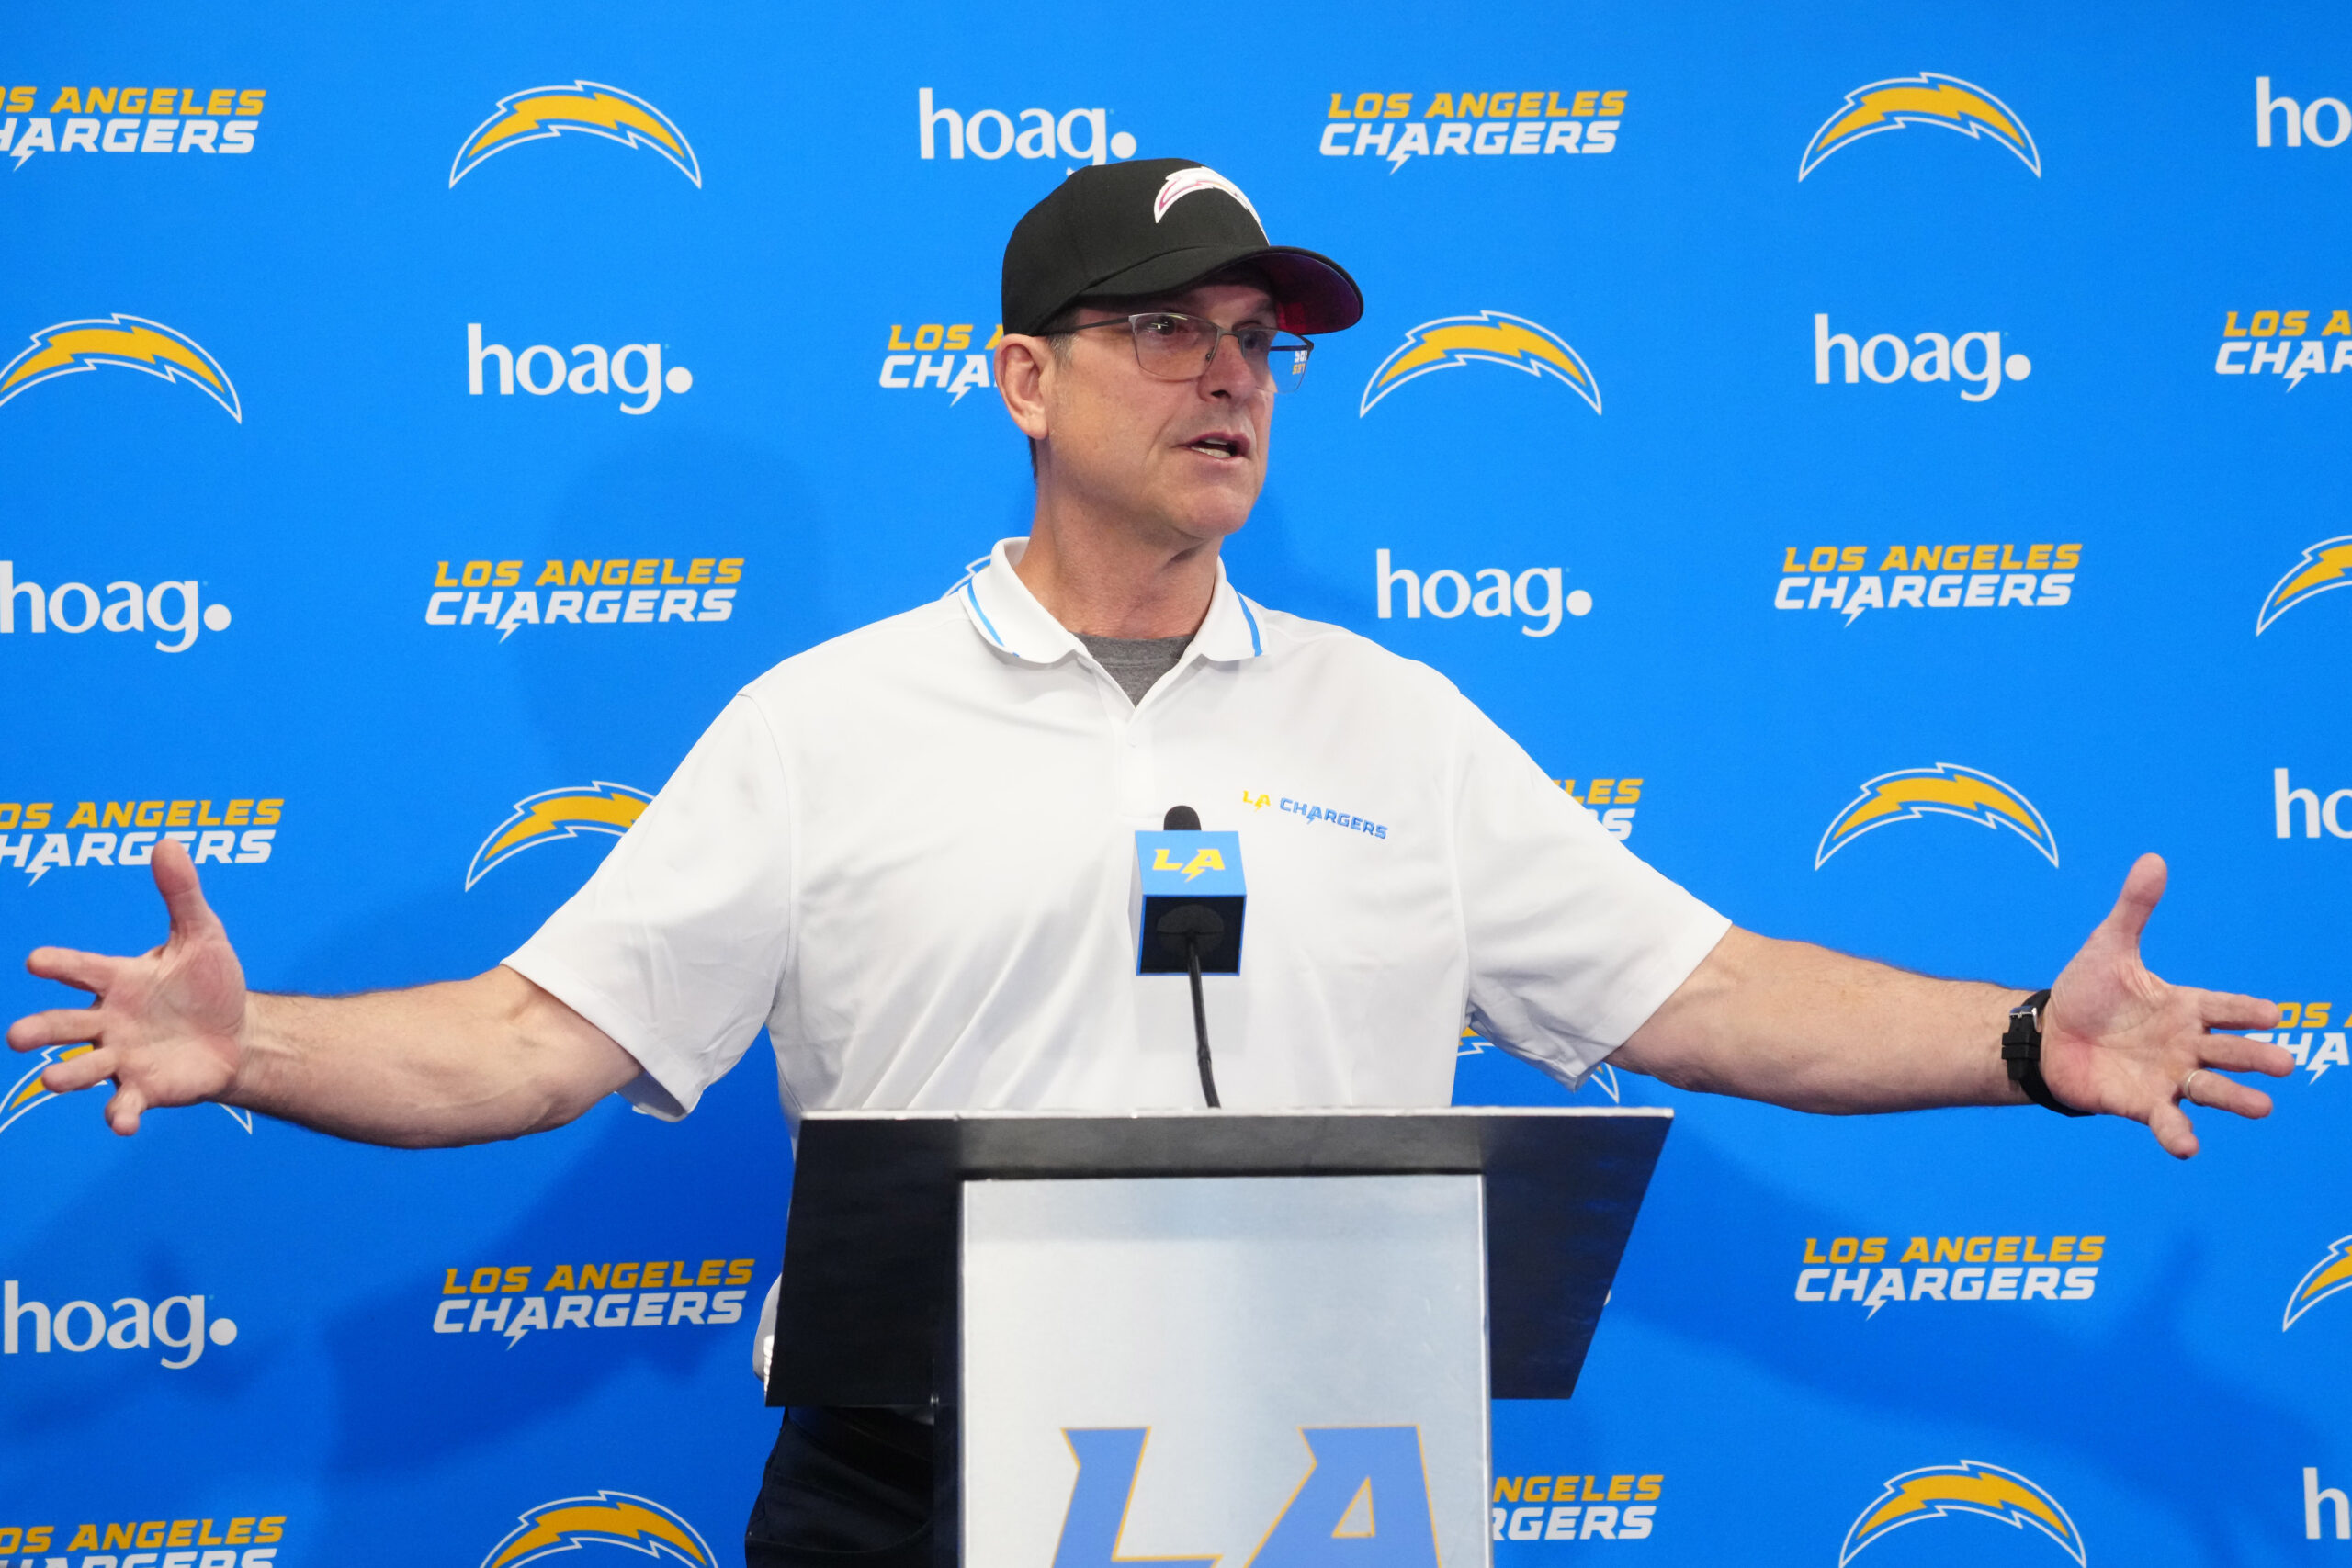 Los Angeles Chargers coach Jim Harbaugh speaks at press conference at Hoag Performance Center.